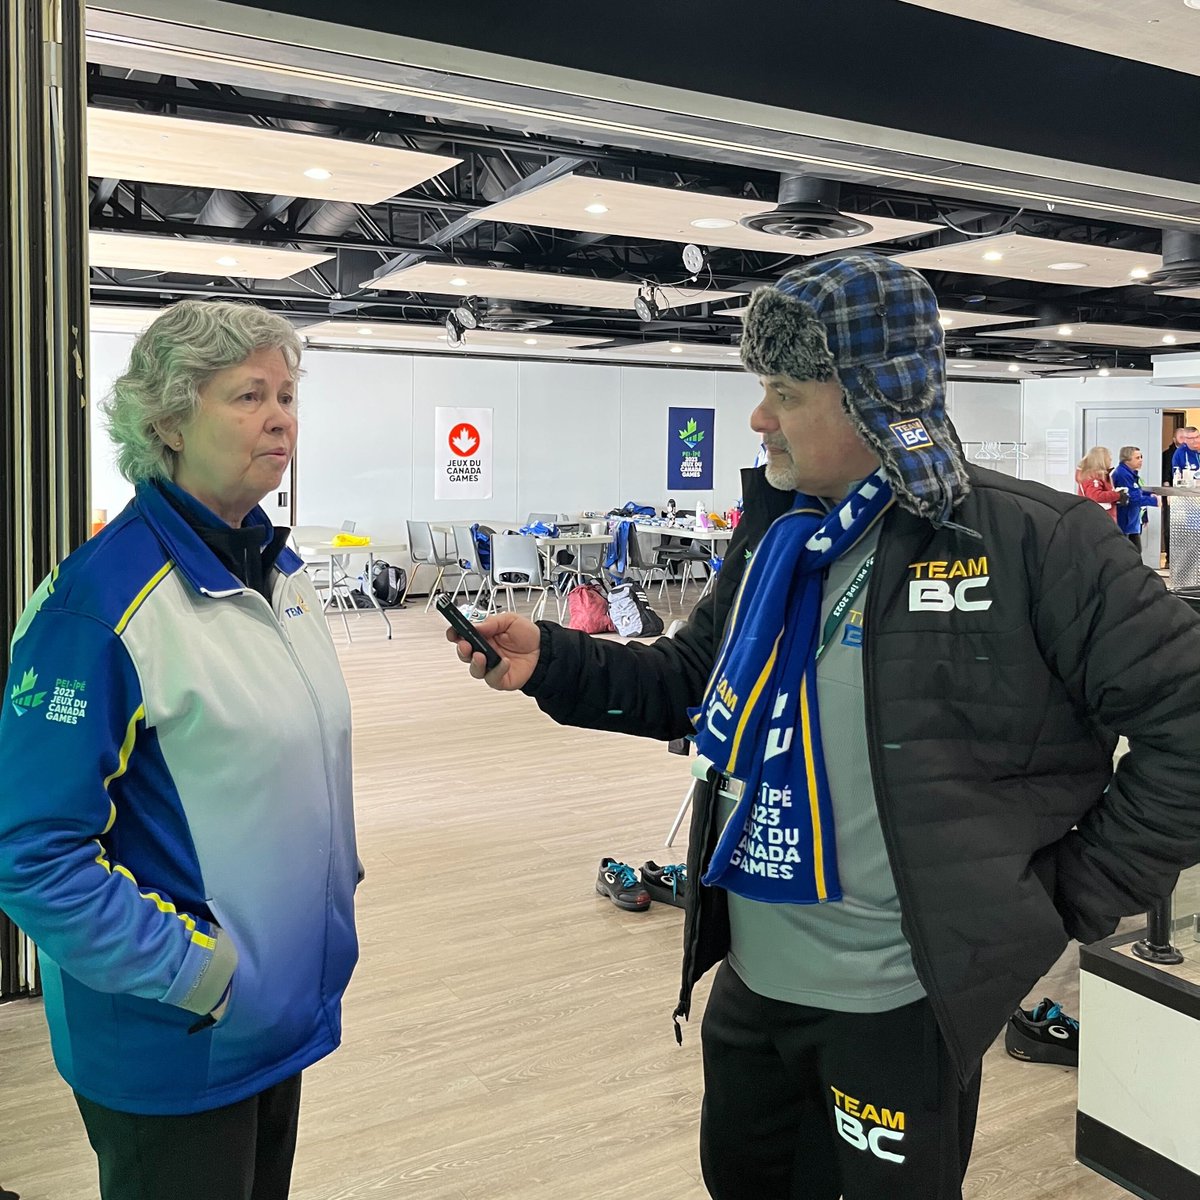 Wendy Cseke, coach of @teamrempel1 in PEI, has been named @CurlBC Coach of the Year! 🎉

Revisit our story from February about the team's experience at the @2023CanadaGames 👇

📰 bit.ly/42GMxAx | #WEareBC